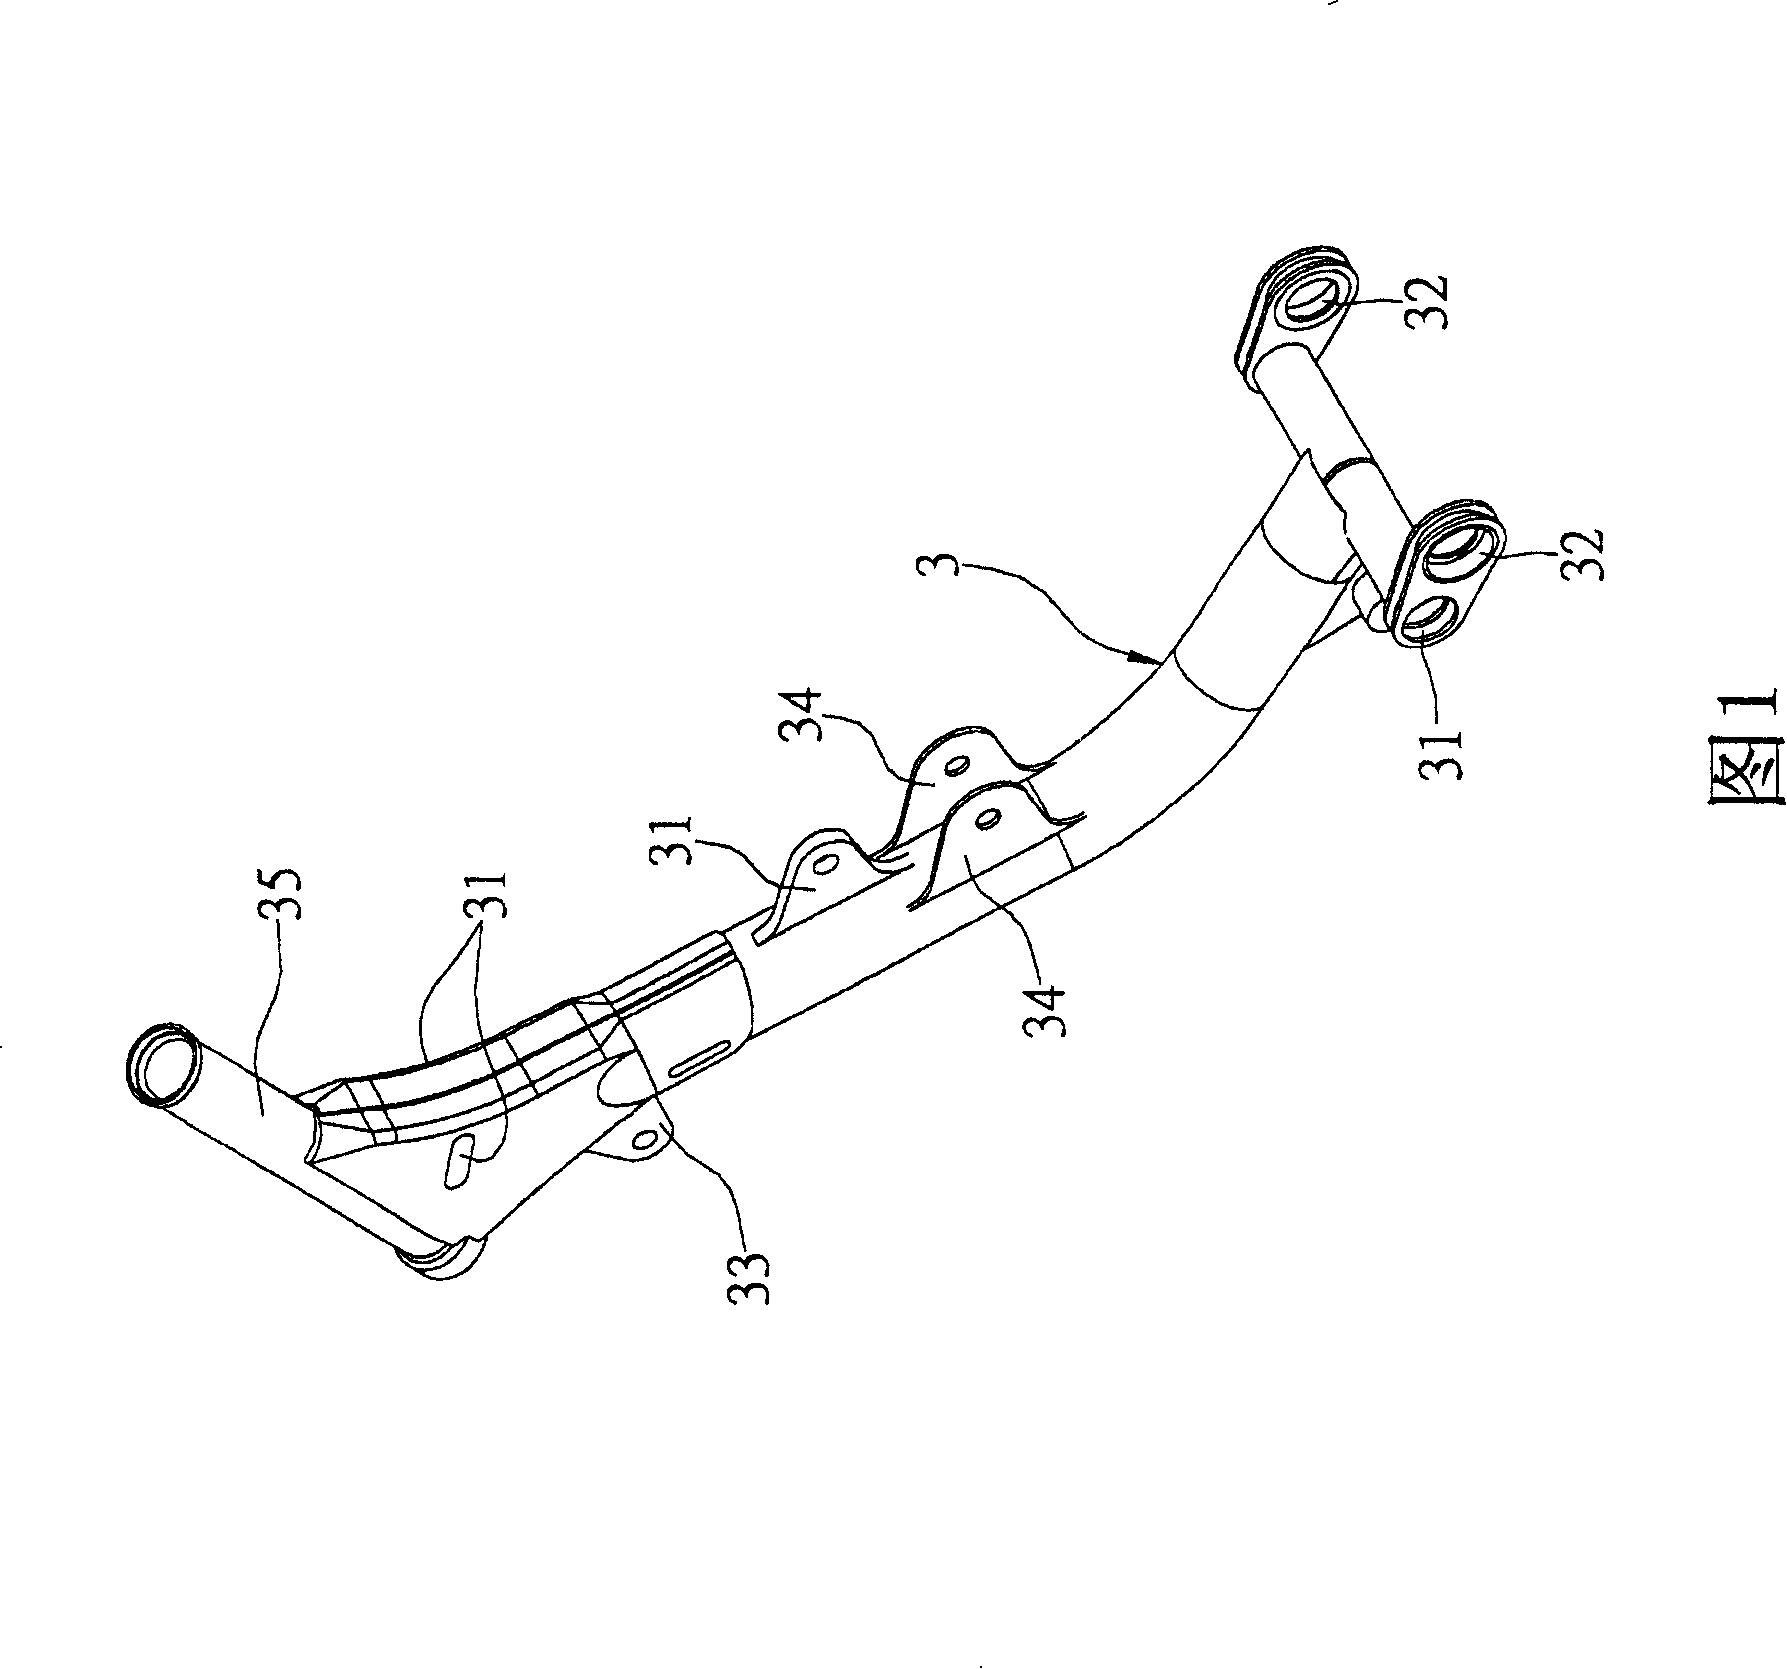 Bicycle frame structure for automatic bicycle